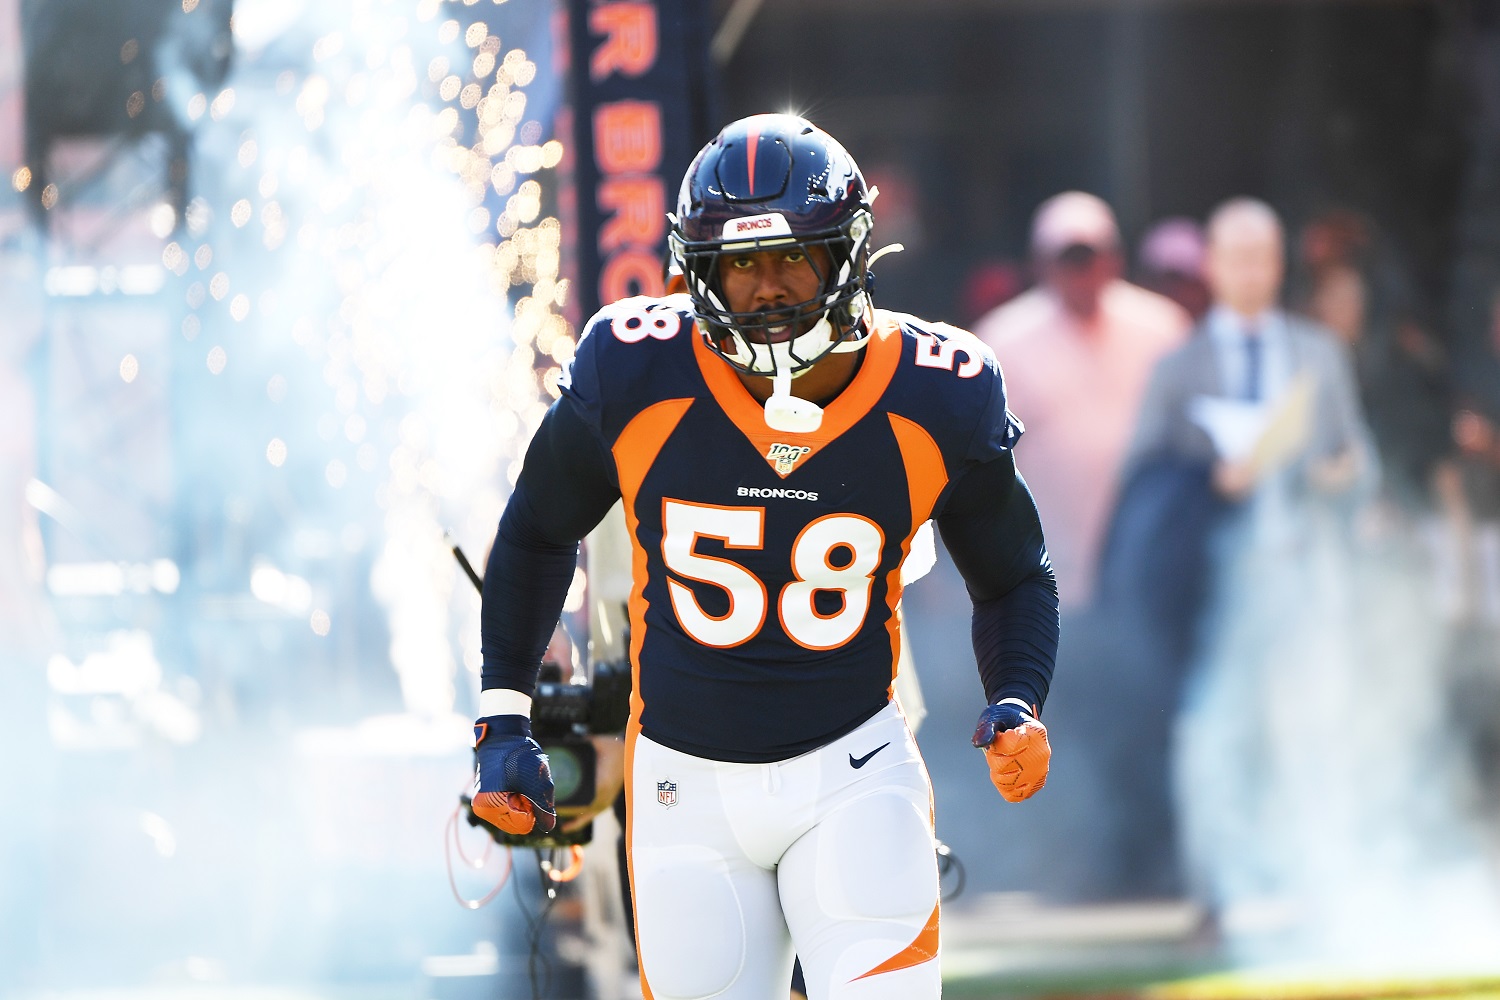 Denver Broncos outside linebacker Von Miller takes the field for a game against the Tennessee Titans in Denver on Oct. 13, 2019. | Joe Amon/MediaNews Group/The Denver Post via Getty Images